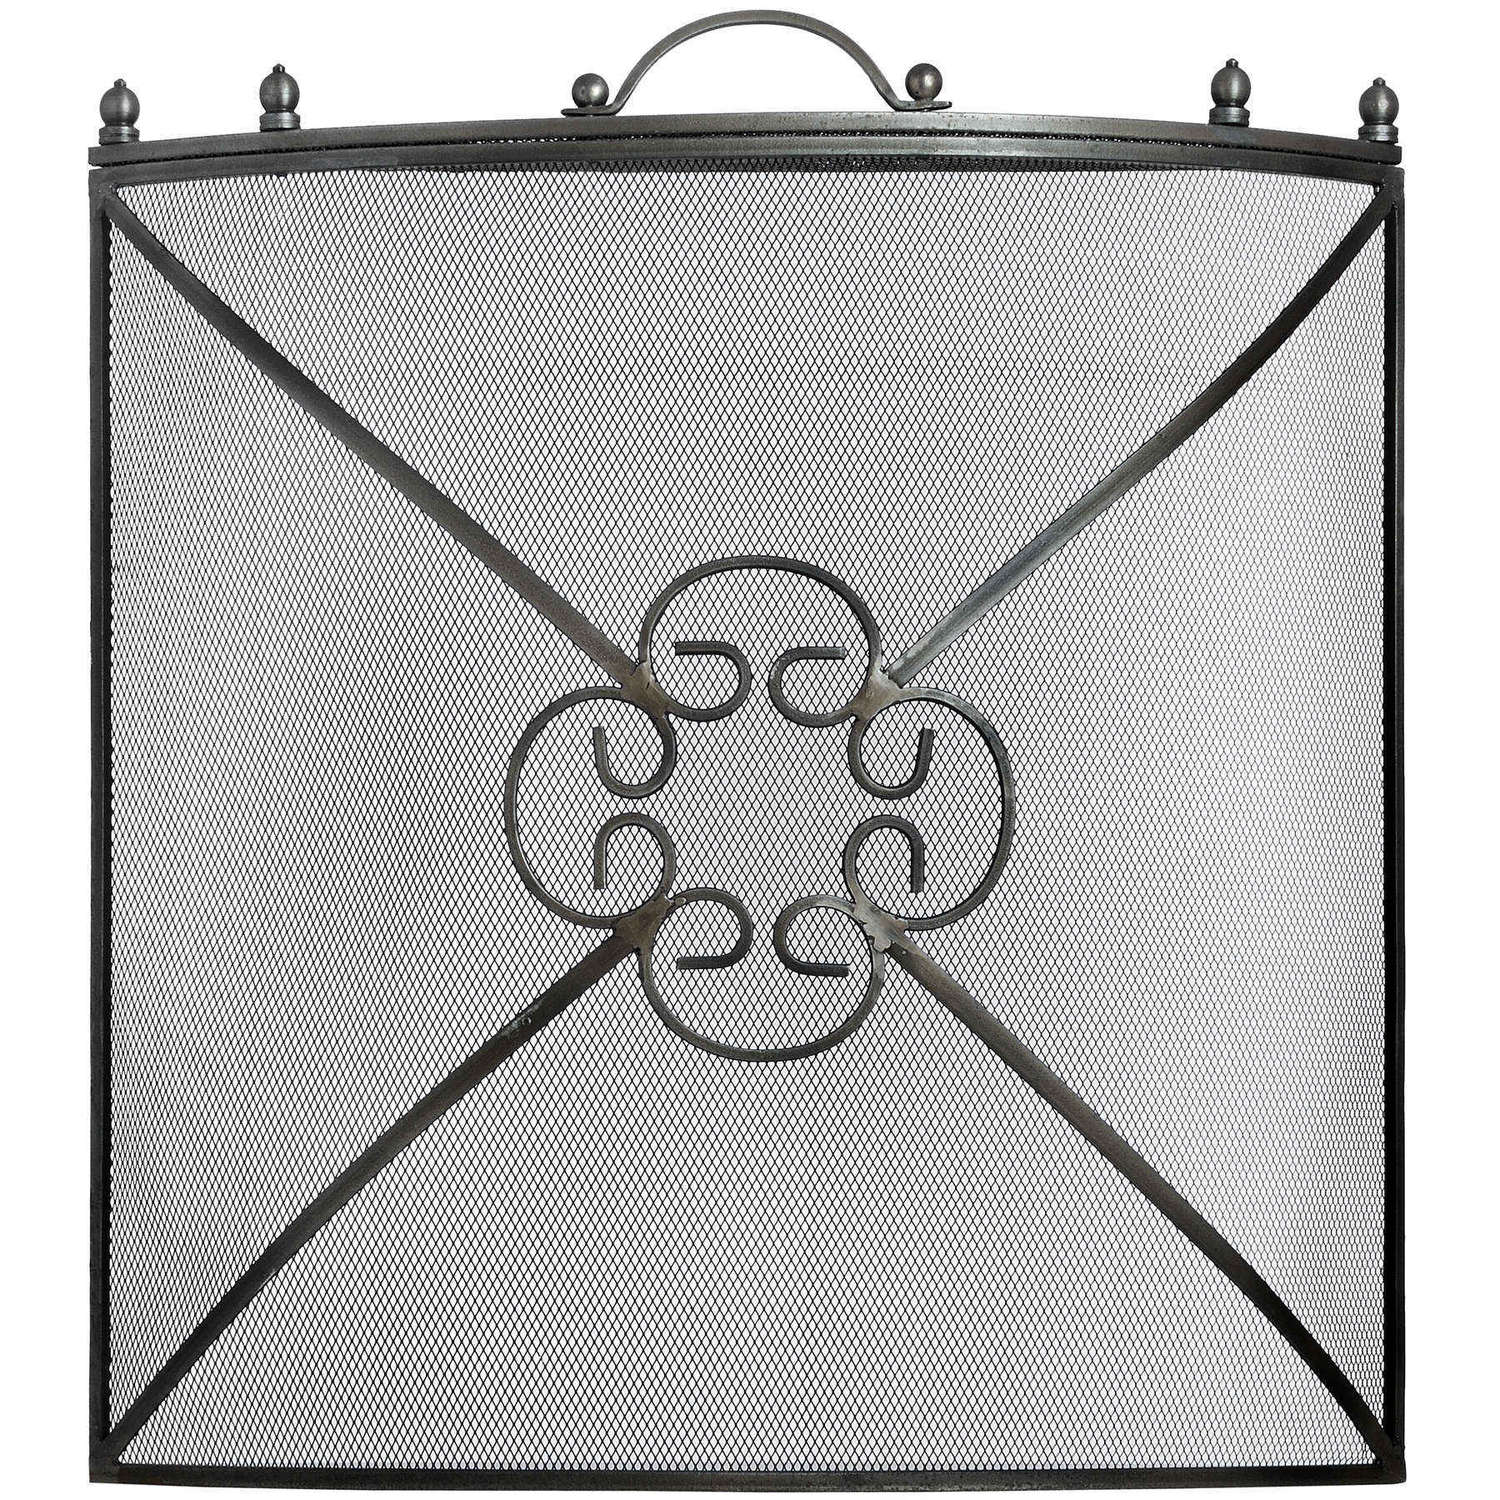 Mesh Fireguard in Antique Pewter Effect Finish - Image 1